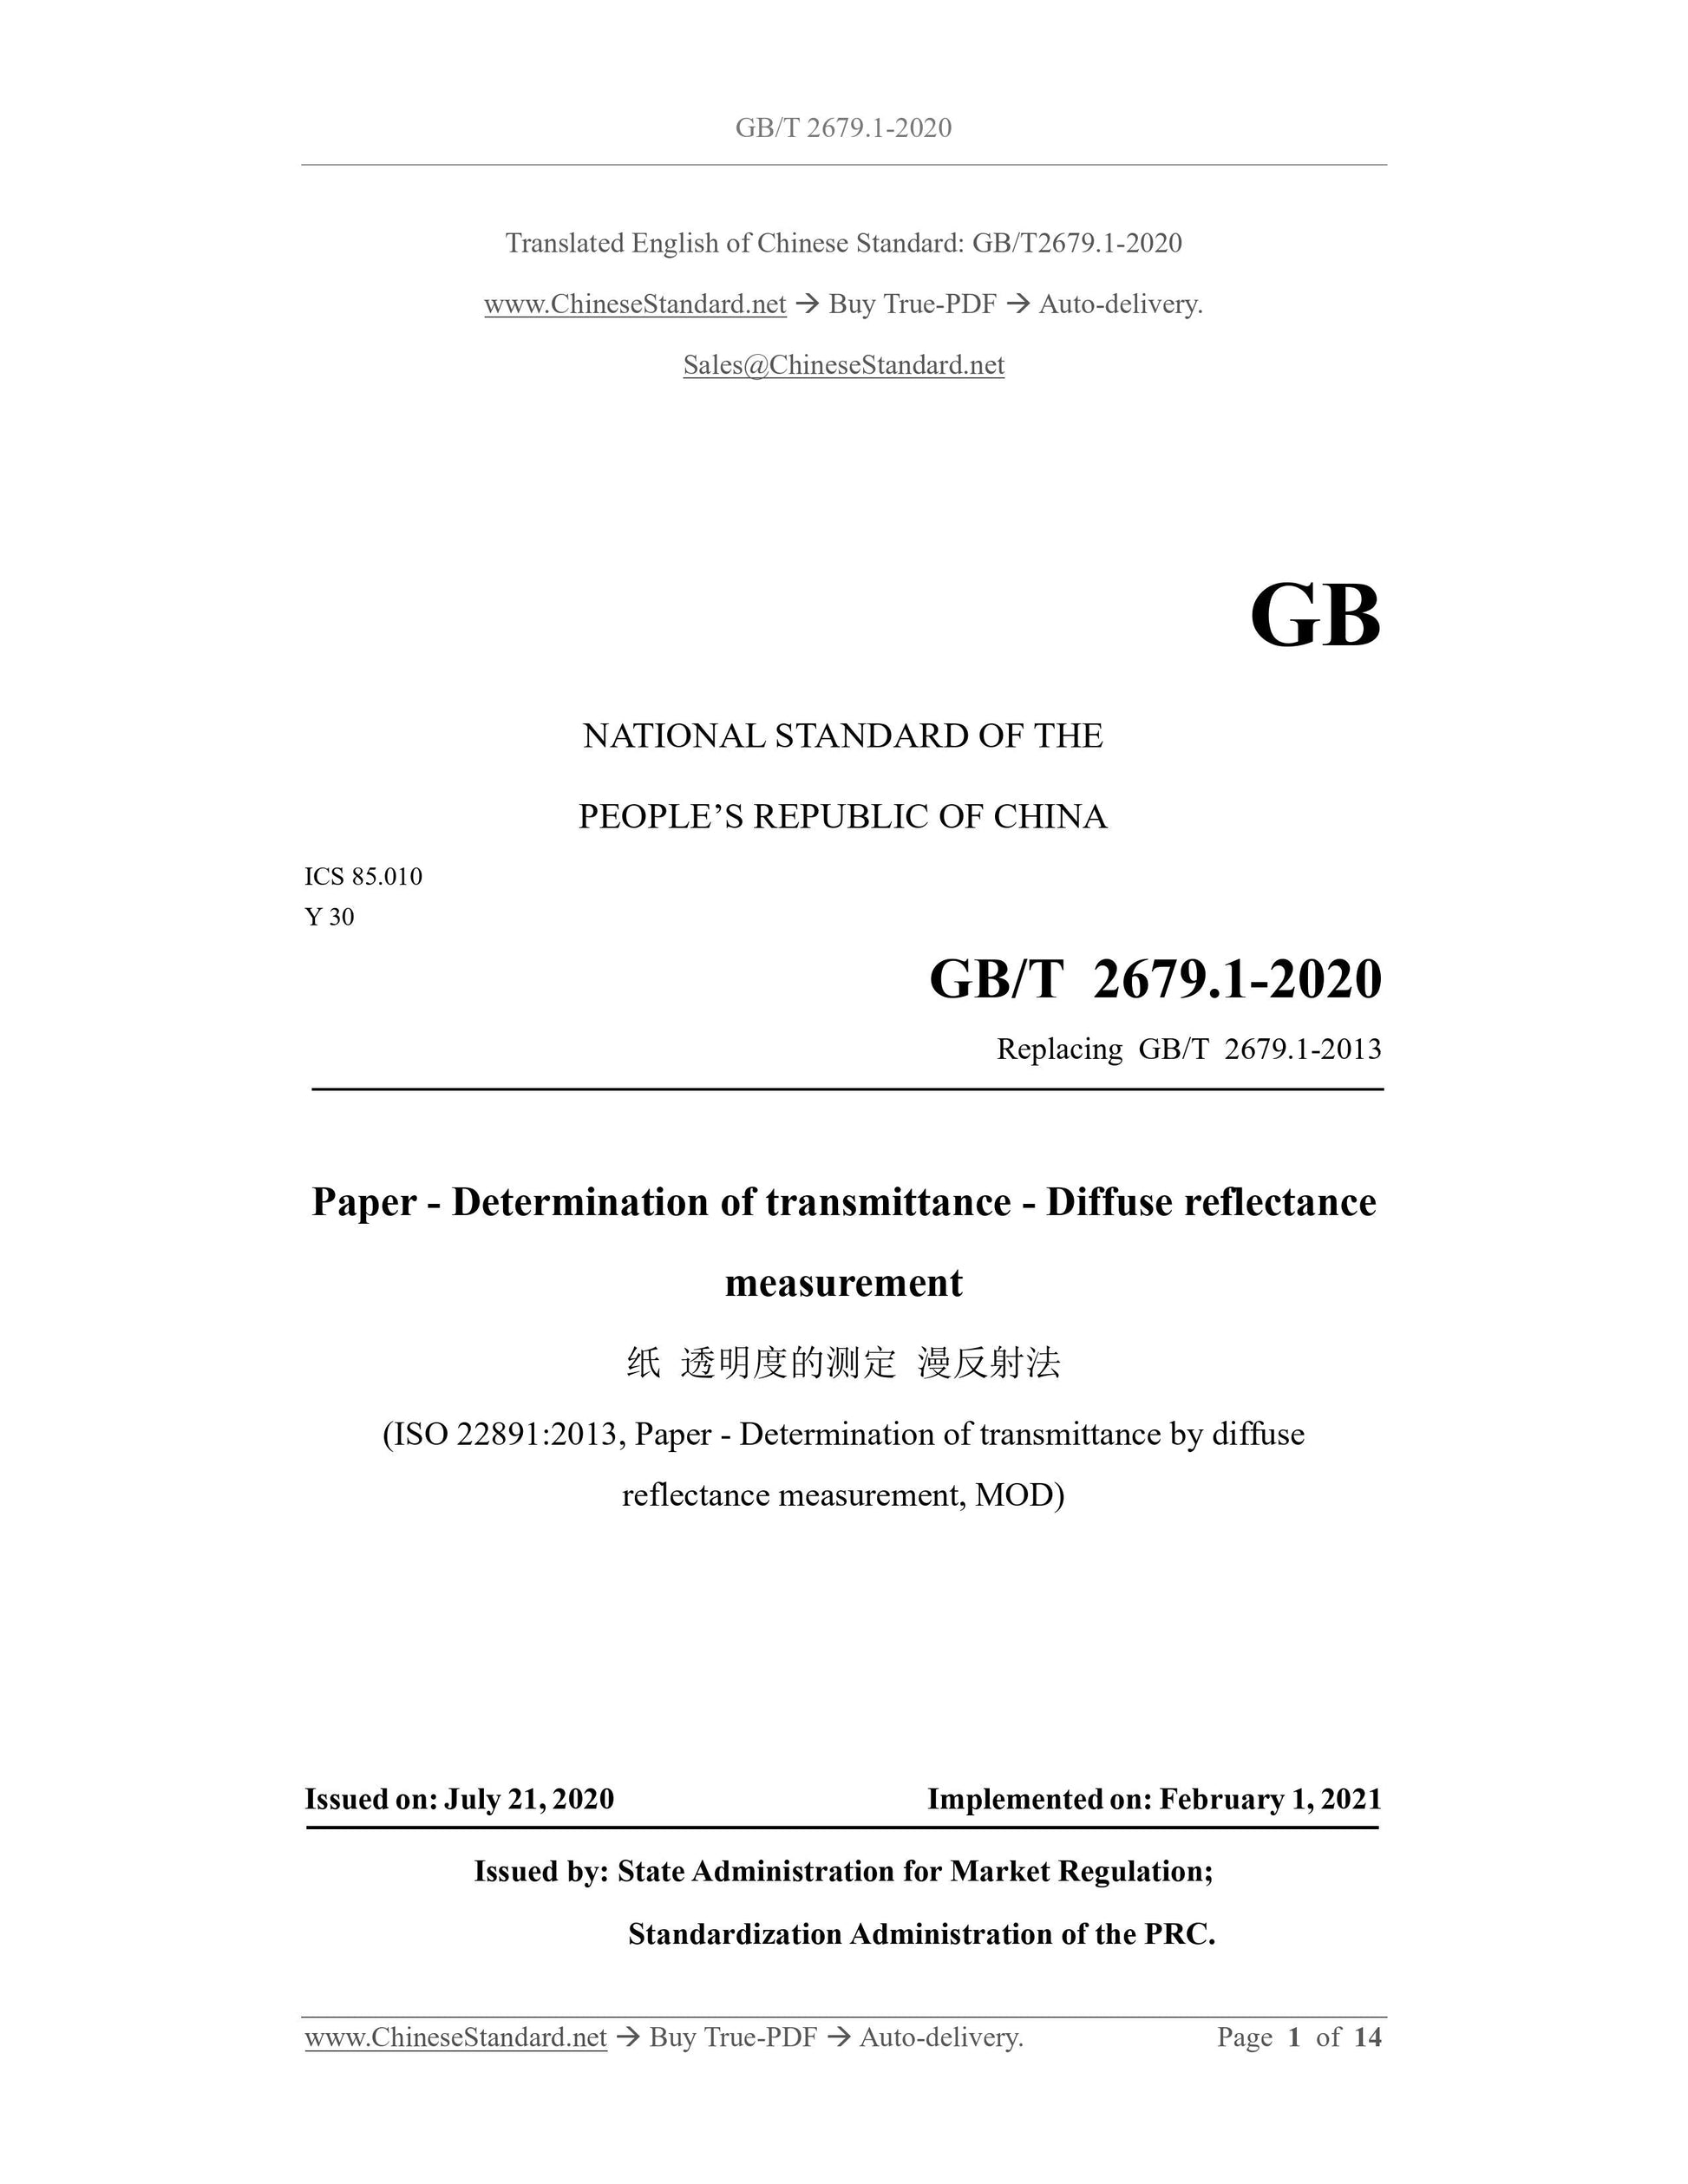 GB/T 2679.1-2020 Page 1